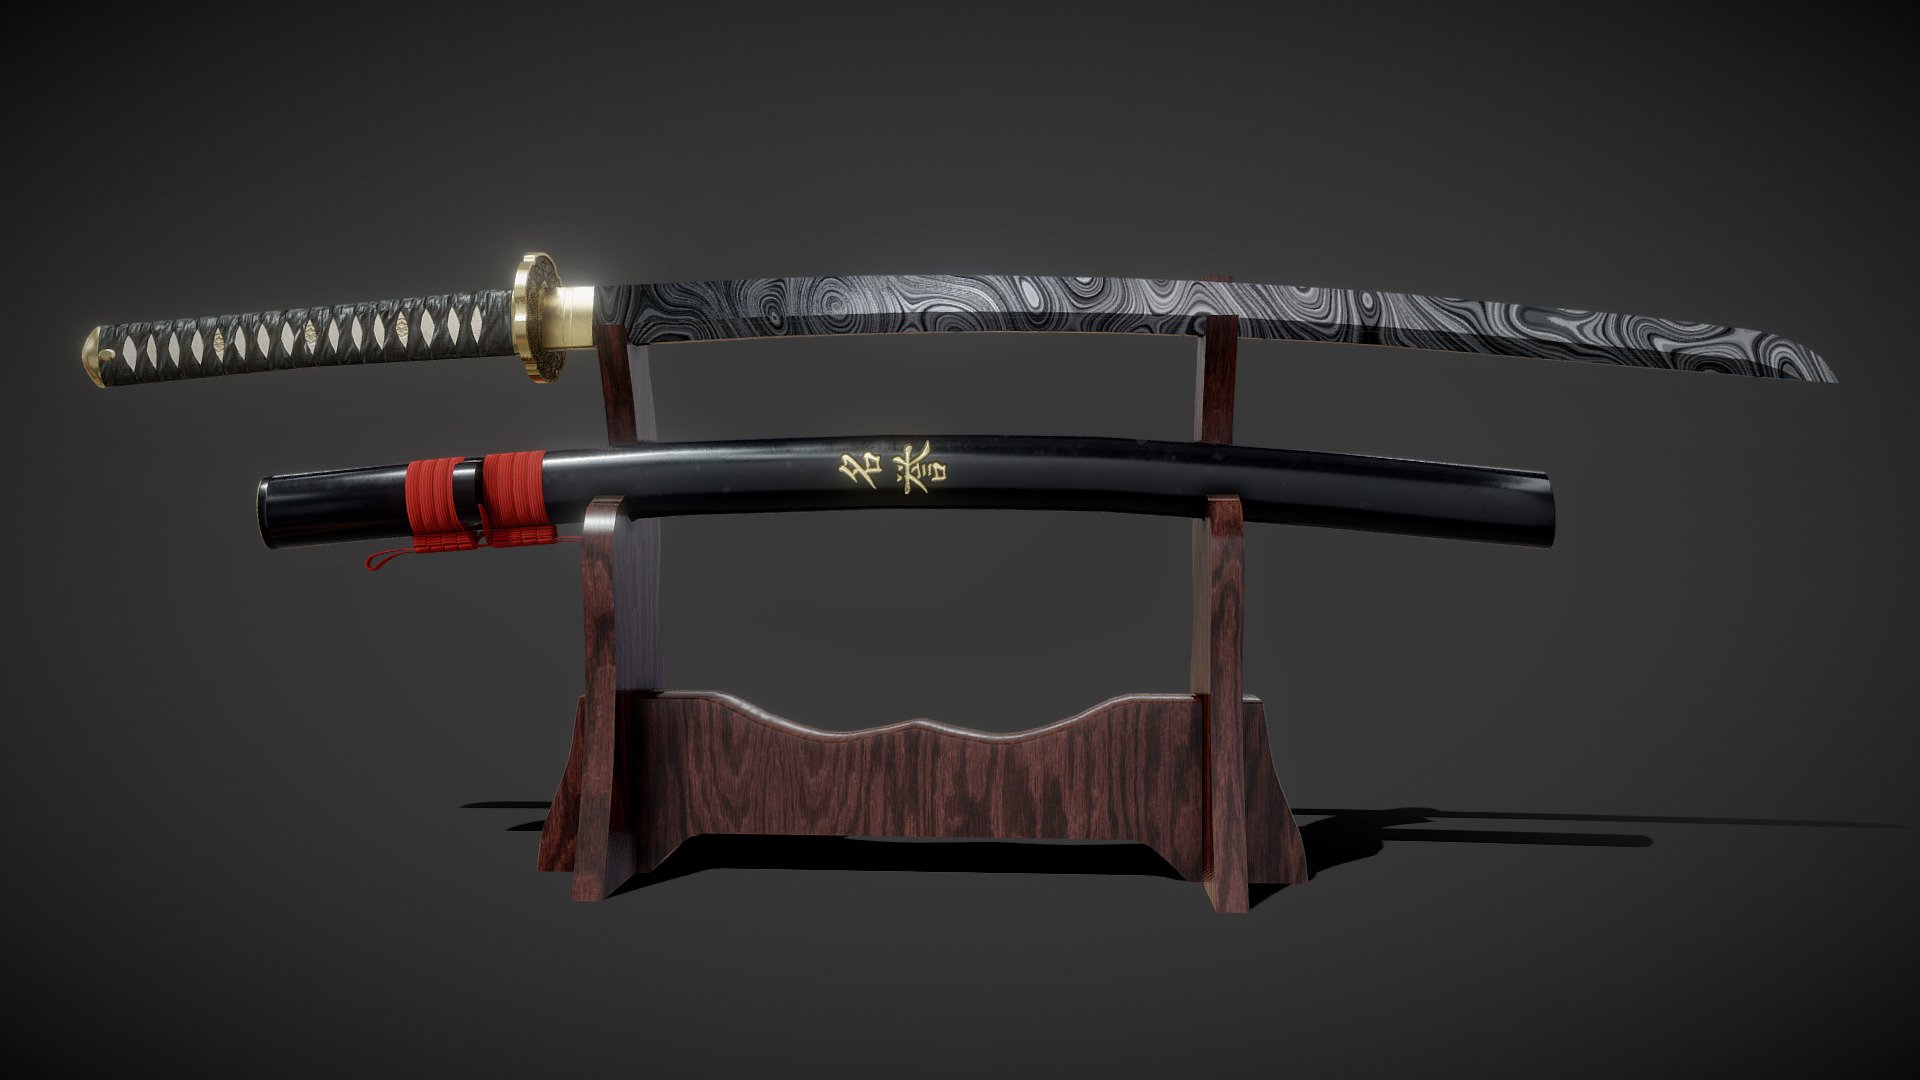 Textures at 2048x2048

Katana: 2976 polys and 2993 verts.

Scabbard: 2196 polys and 2237 verts.

Rack: 1360 polys and 1370 verts.

The RaR file contains the FBX files and 2 folders for unity5 and unreal4 textures.

RaR file size : 9MB 3d model